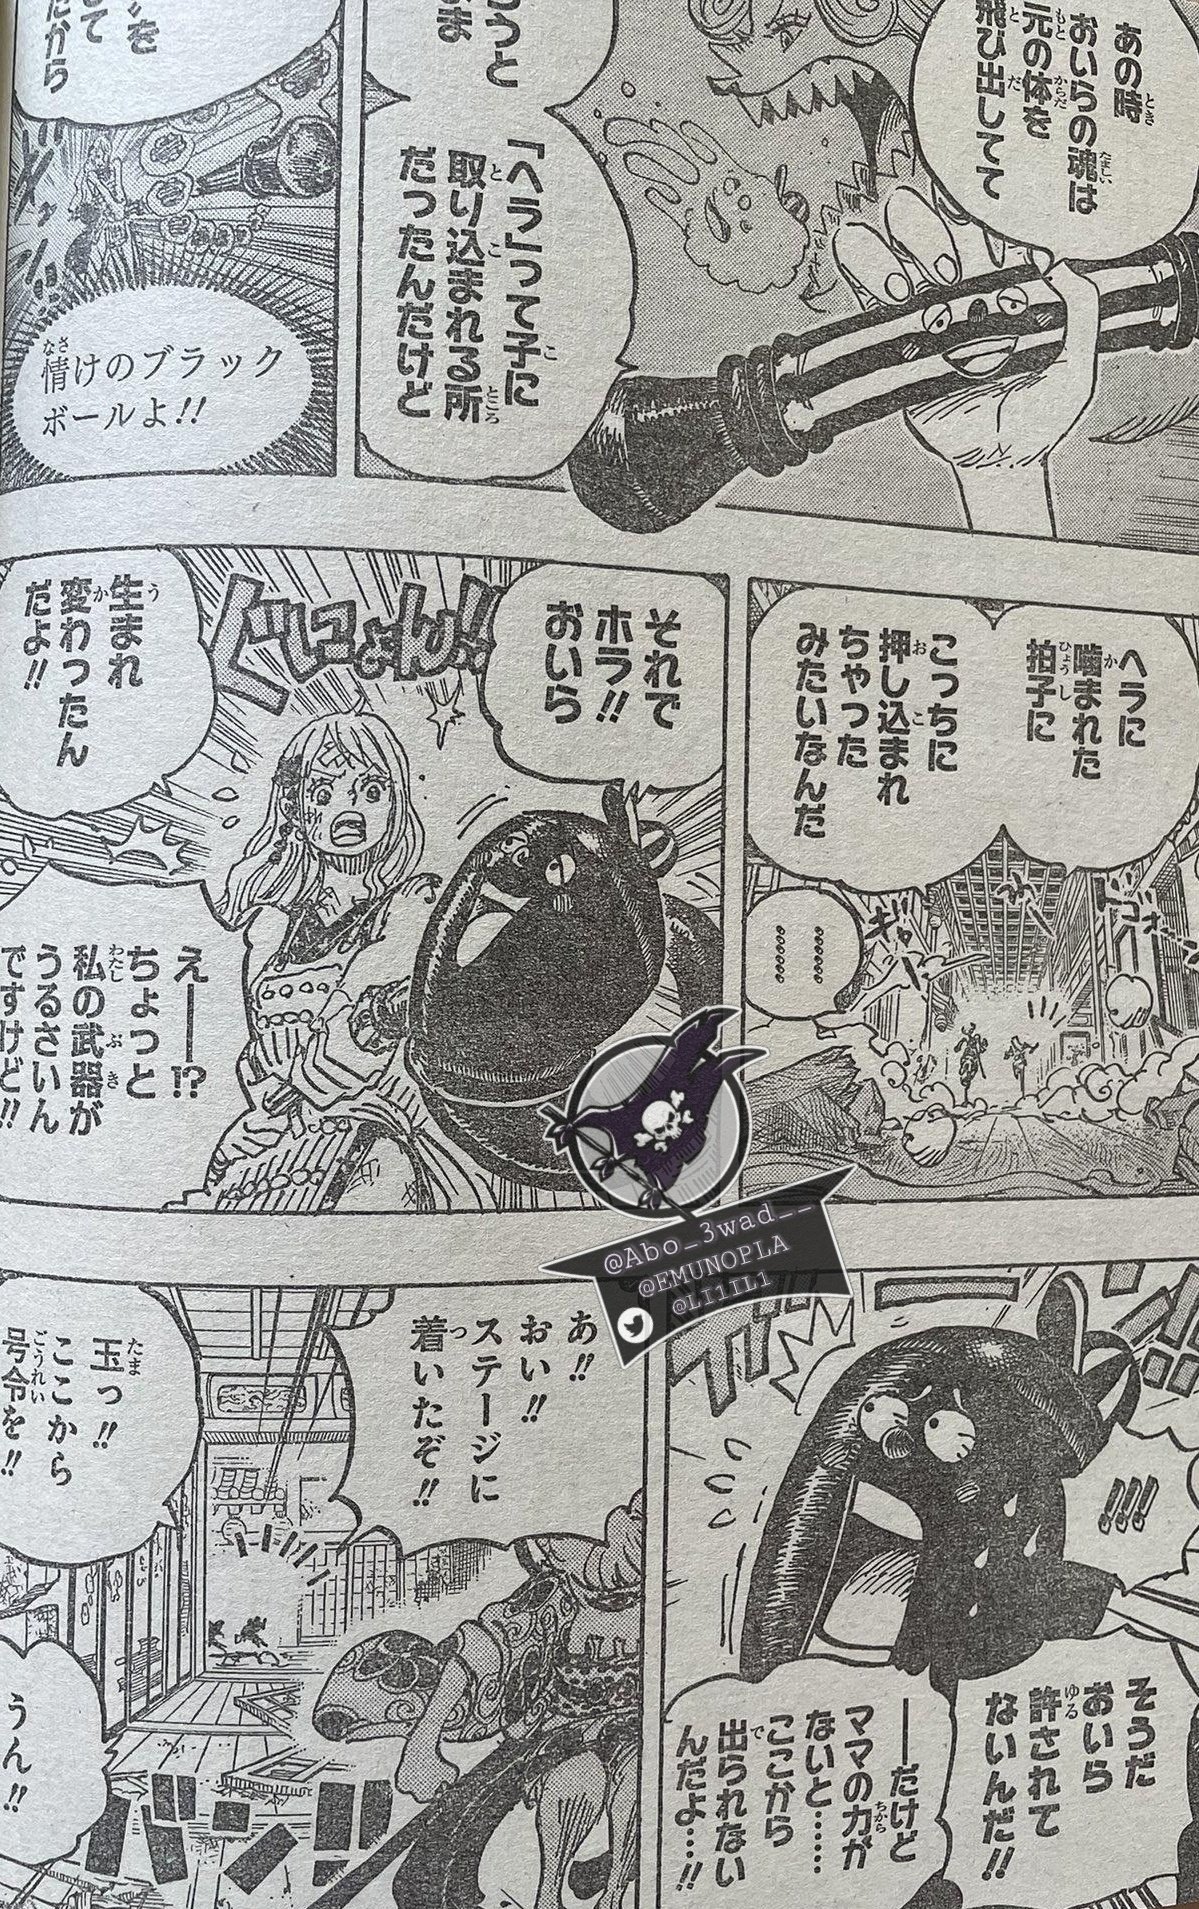 Spoiler One Piece Chapter 1016 Spoilers Images And Summaries Page 2 Worstgen